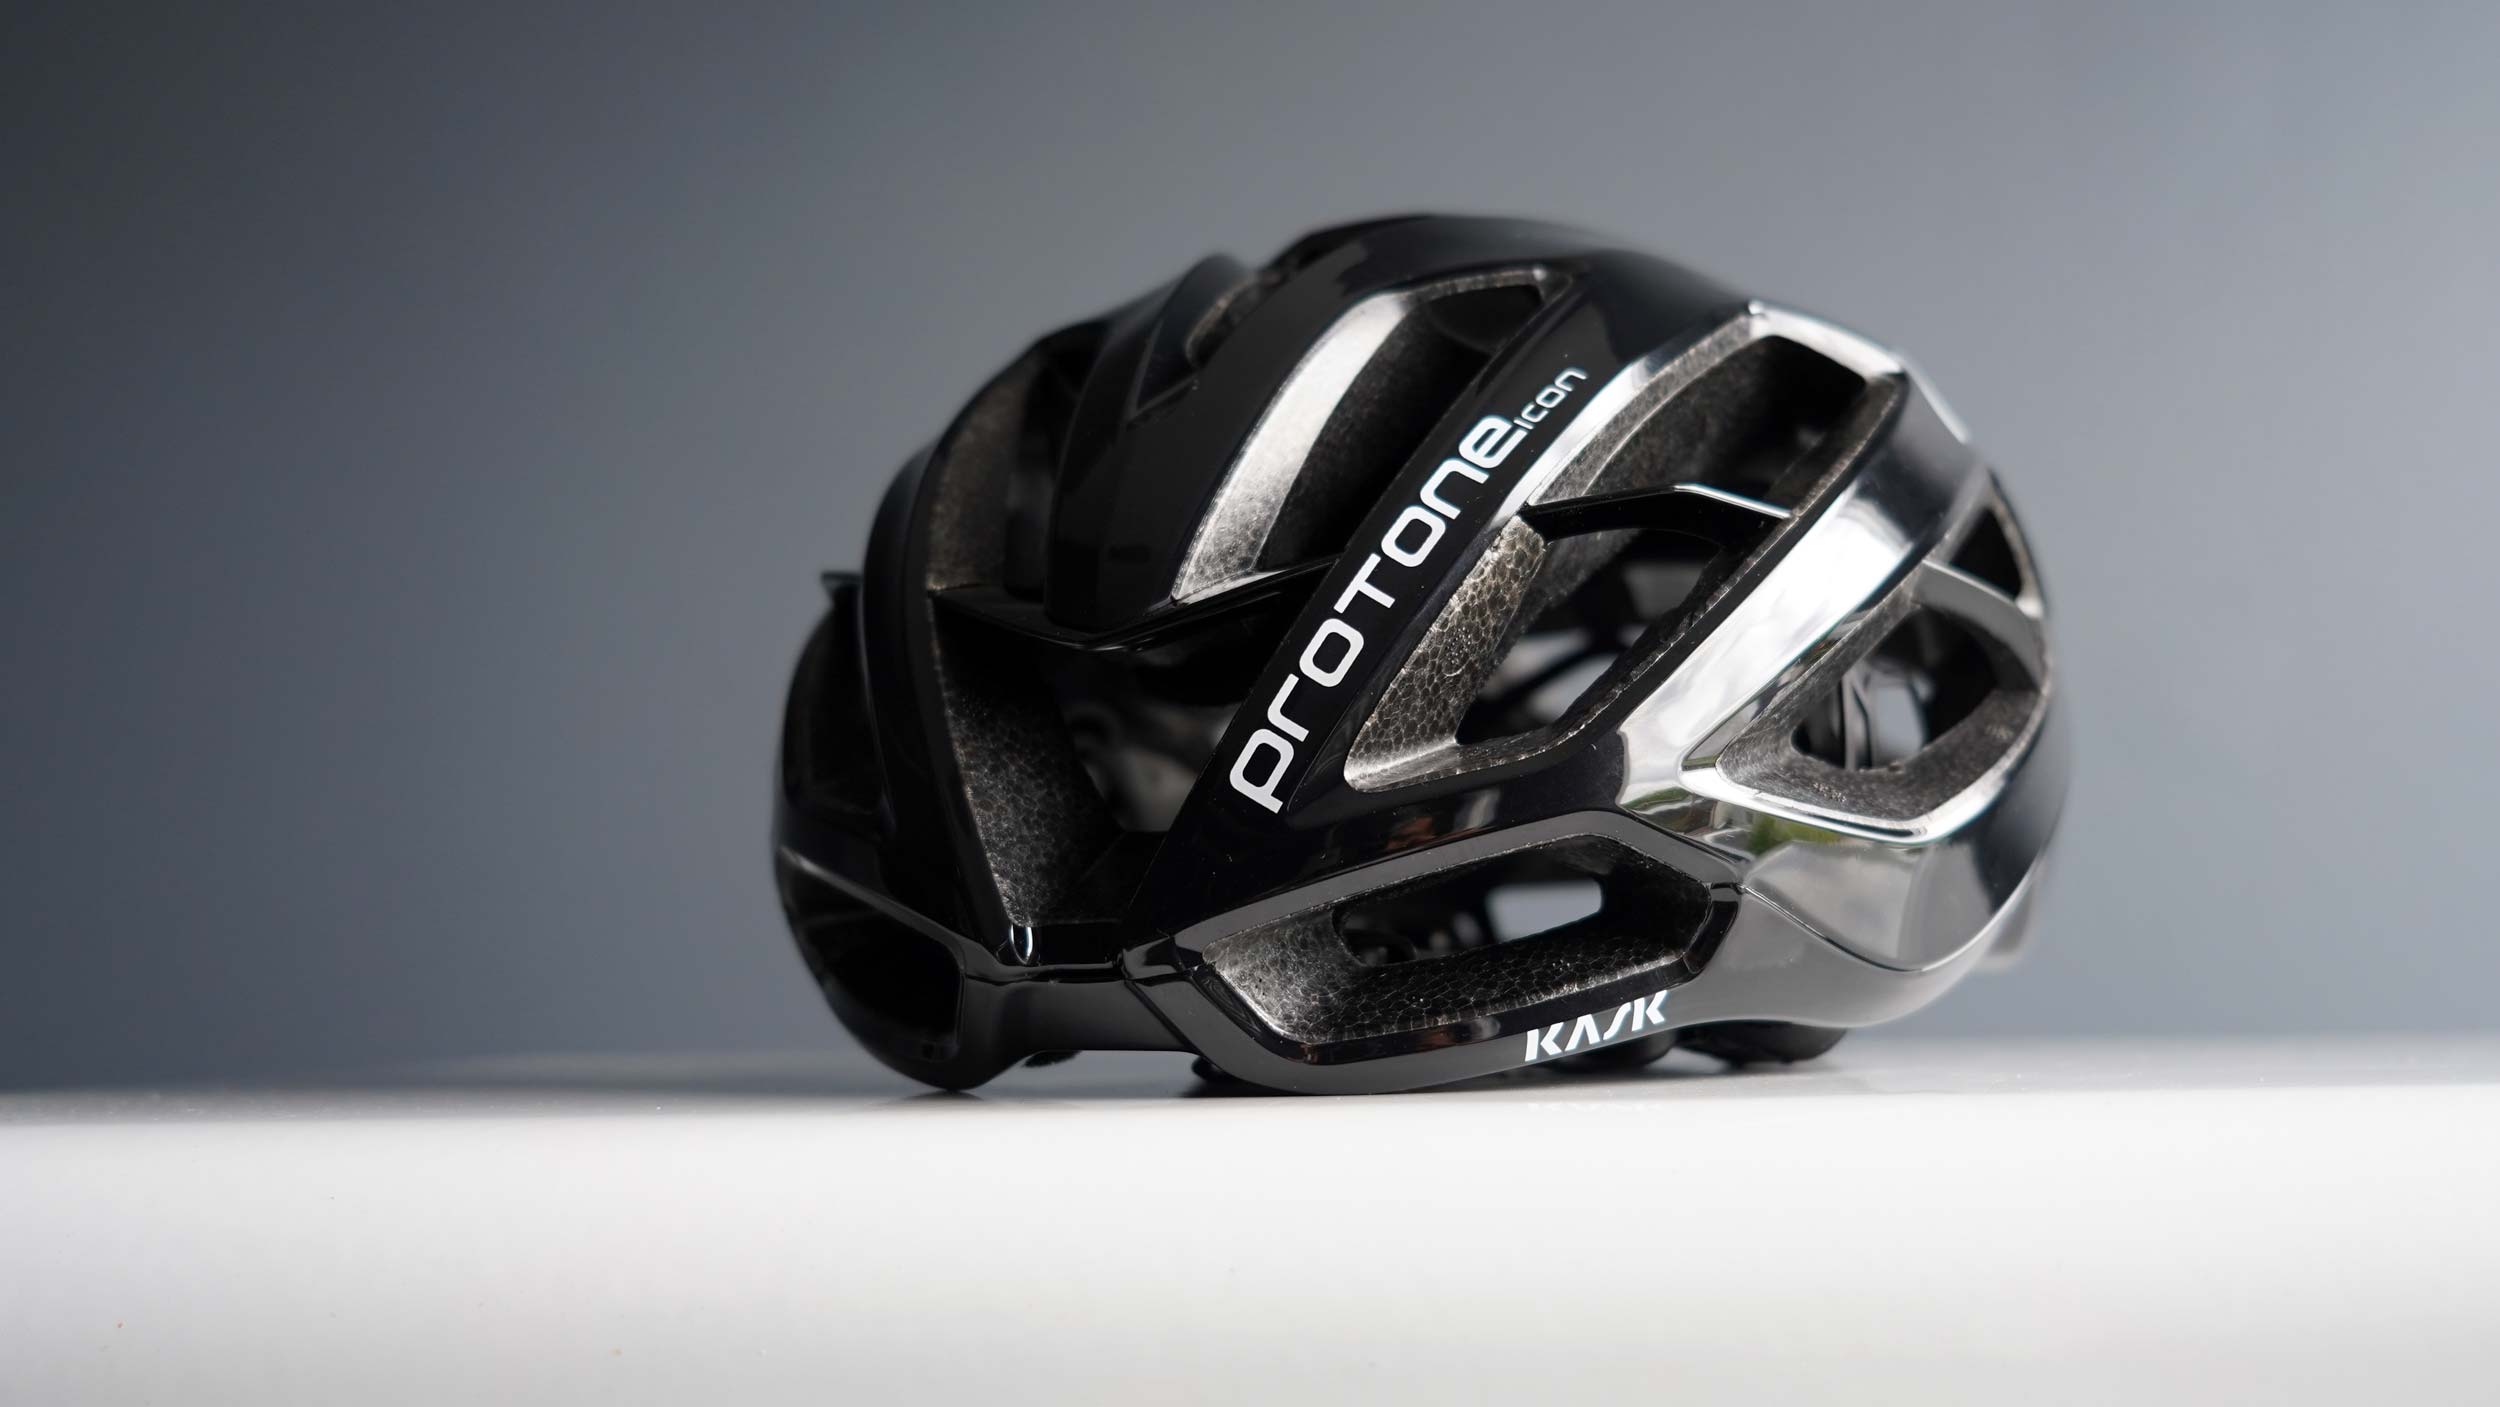 Kask Protone Icon helmet review (part 1) – unboxing, fitting